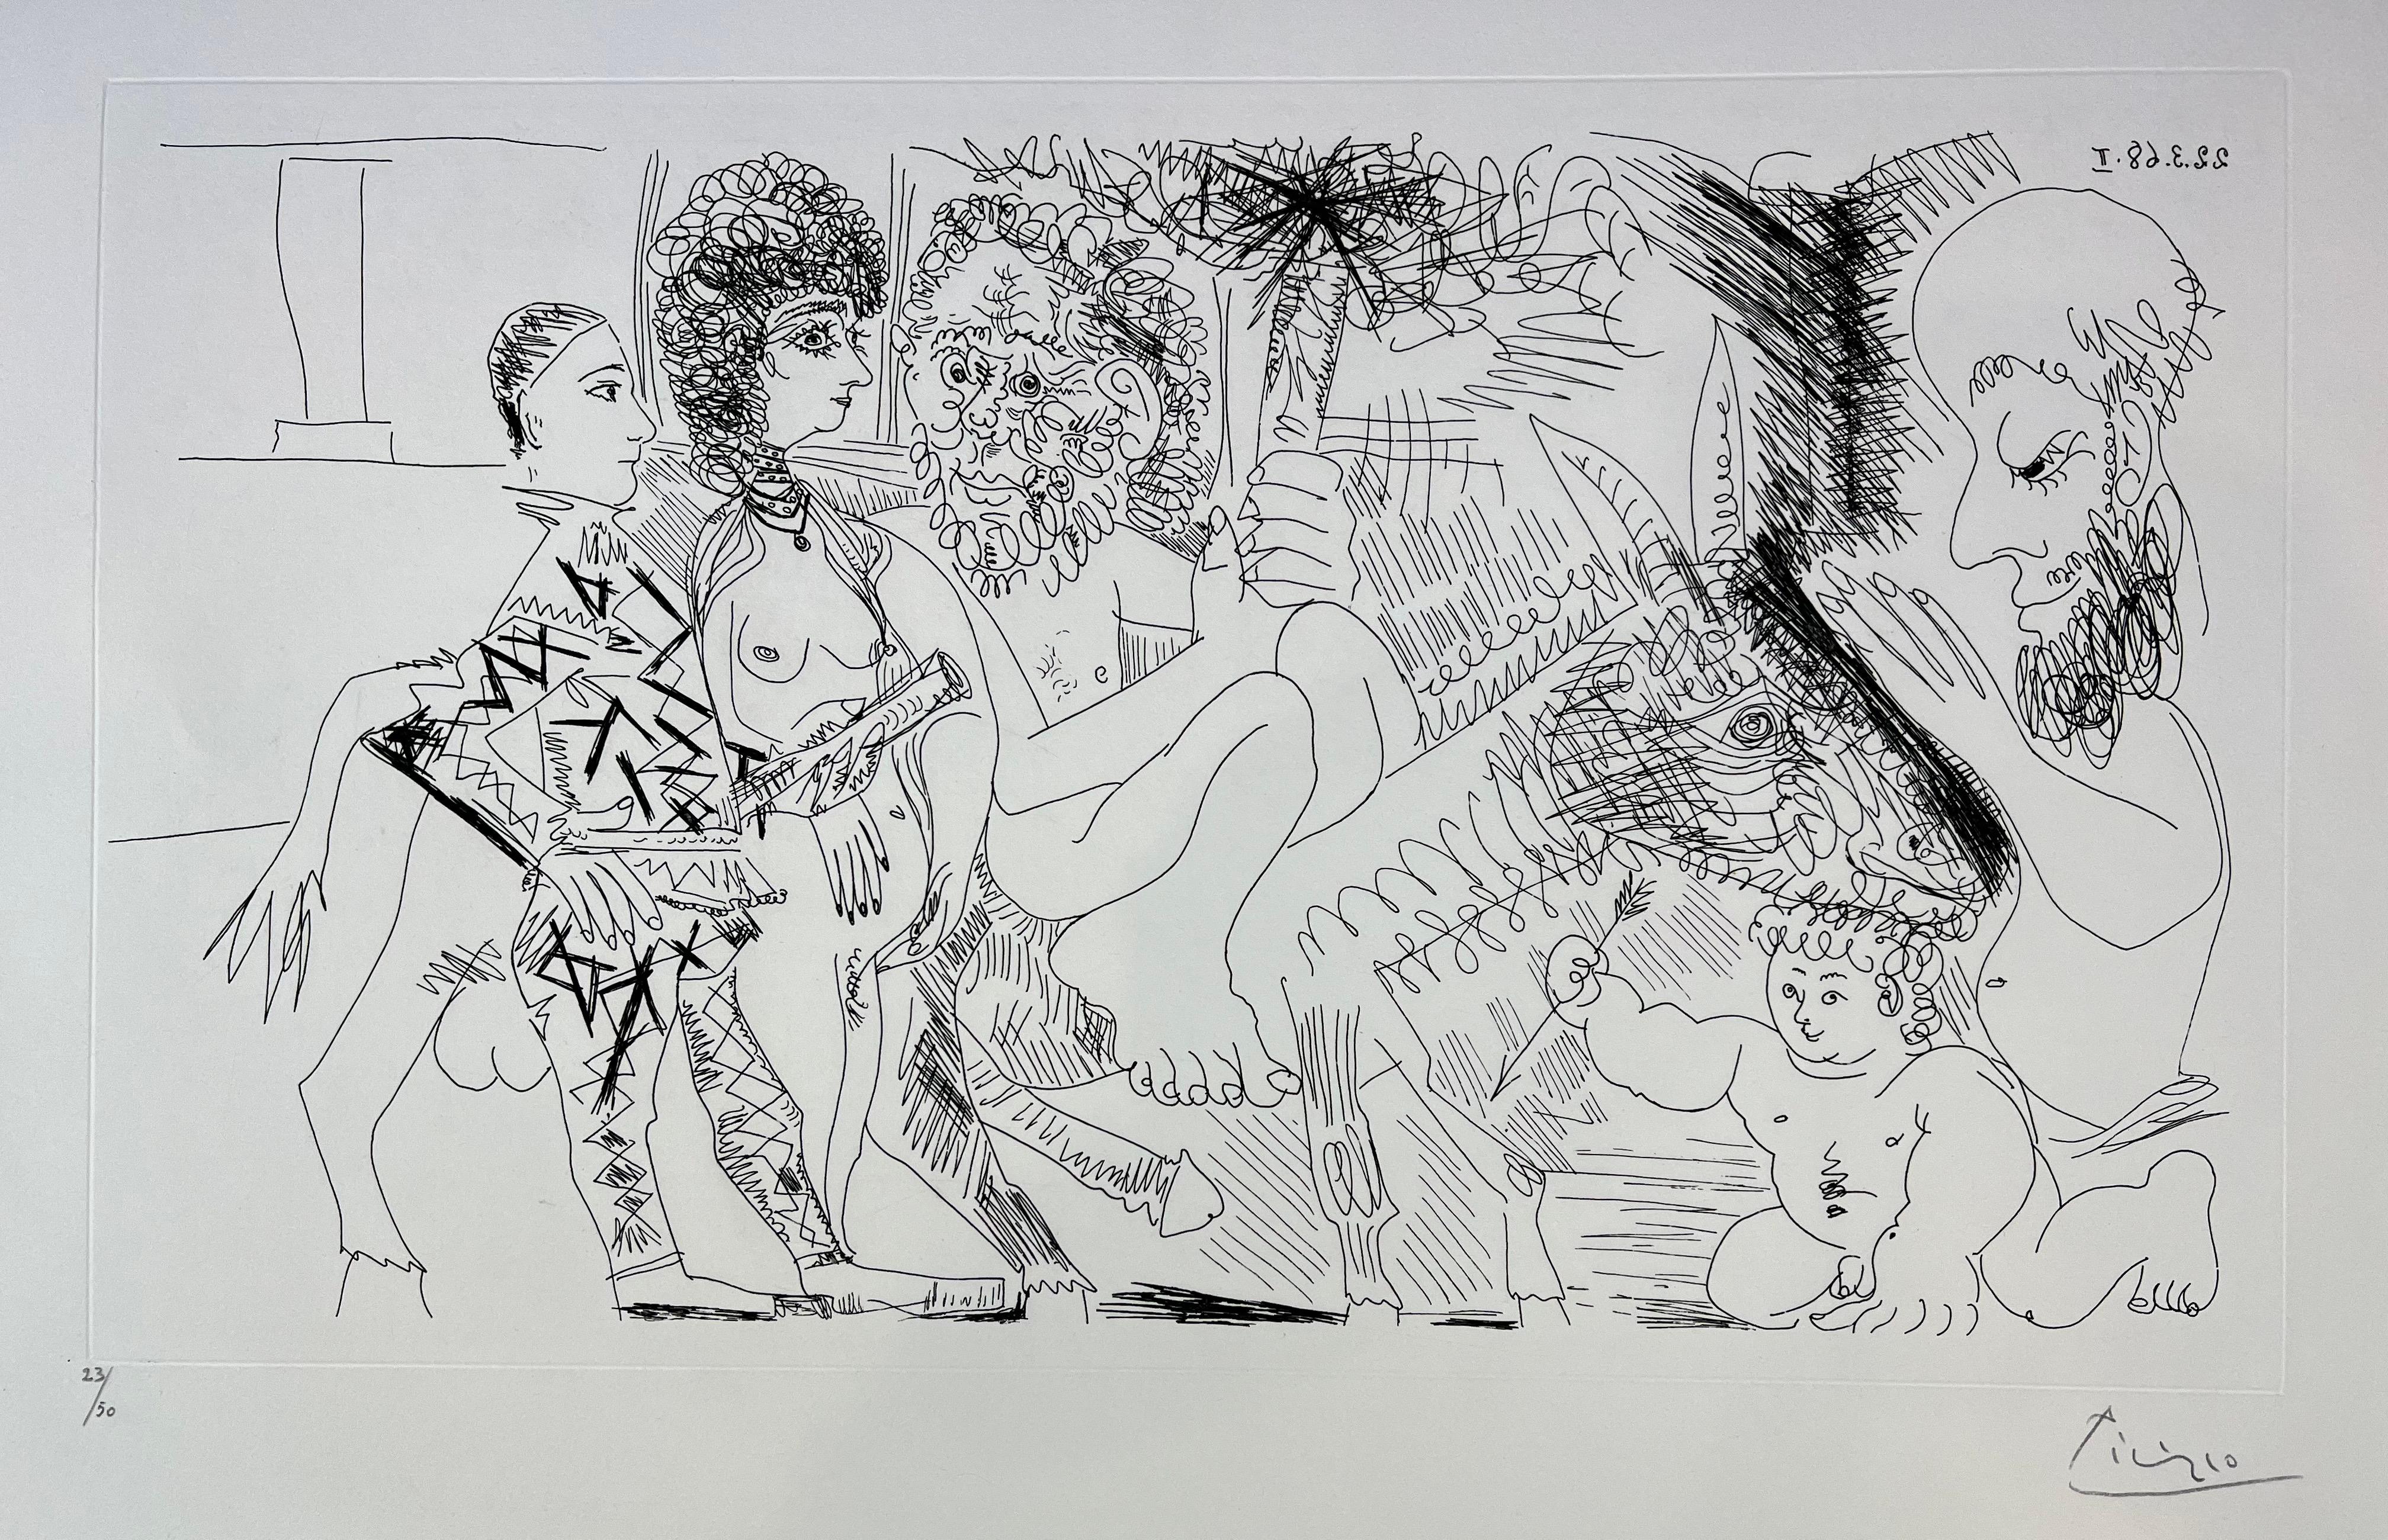 Groupe avec Vieillard à la Torche sur un Ane Amoureux 
Femme et Arlequin
- etching on BFK Rives paper, edited in 1968
Limited edition of 50 copies
Current copy numbered: 23/50 in lower left
signed in pencil by artist in lower right corner
image